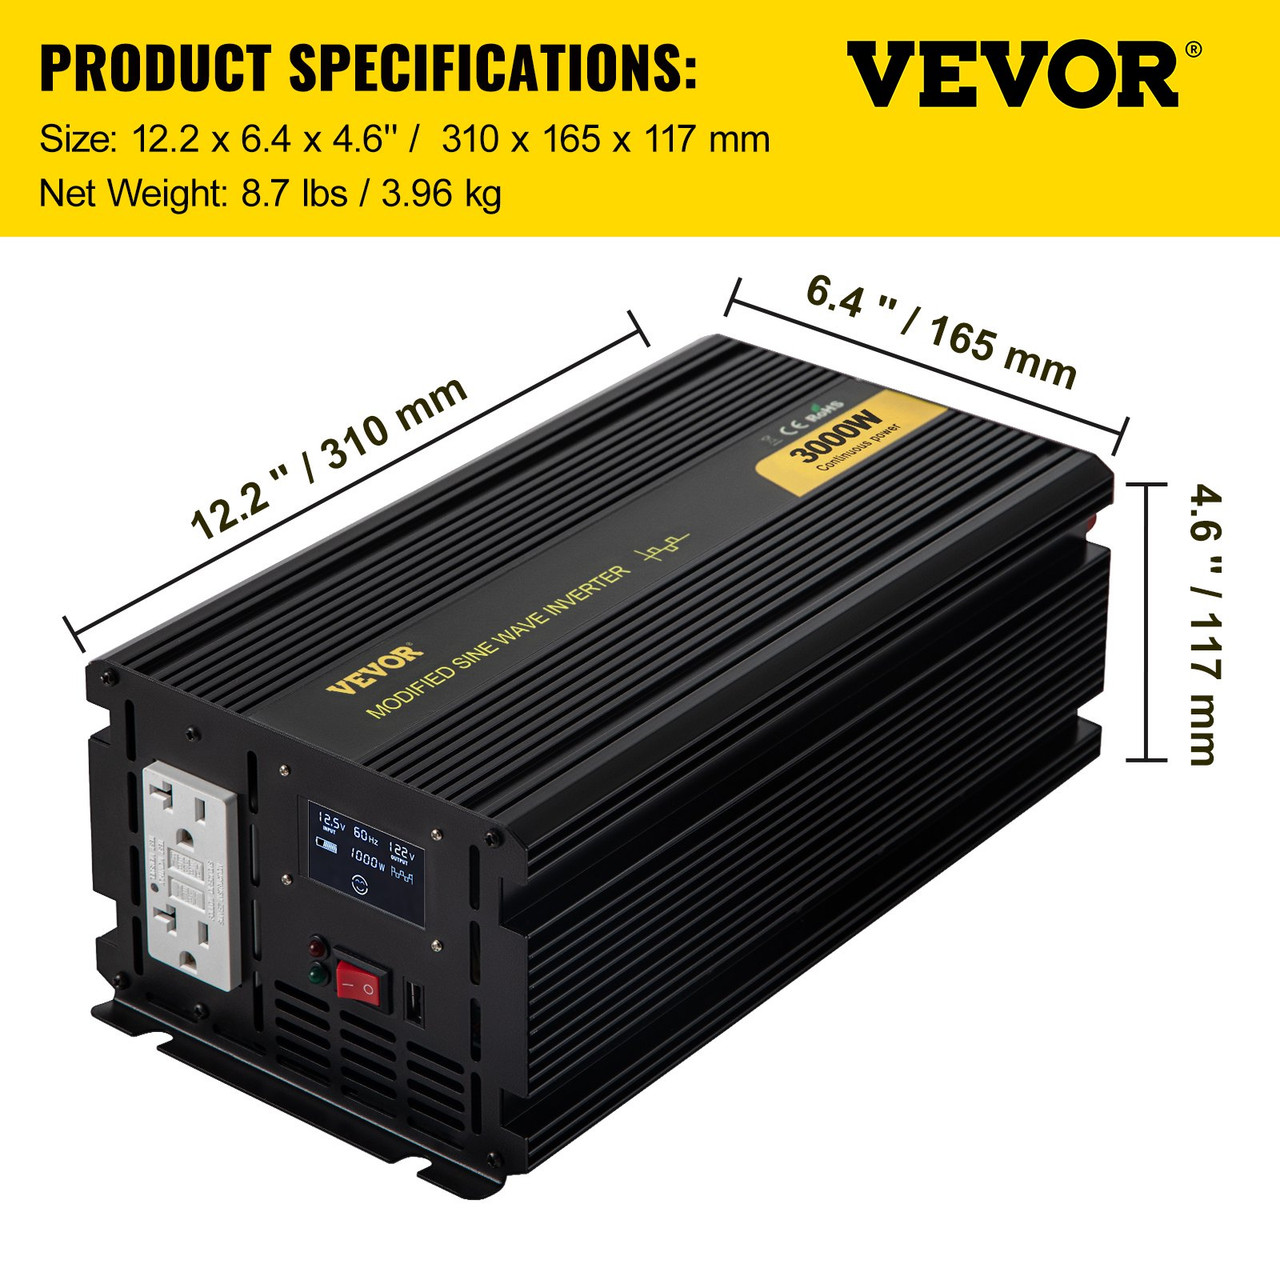 Power Inverter, 3000W Modified Sine Wave Inverter, DC 12V to AC 120V Car Converter, with LCD Display, Remote Controller, LED Indicator, GFCI Outlets Inverter for Truck RV Car Boat Travel Camping